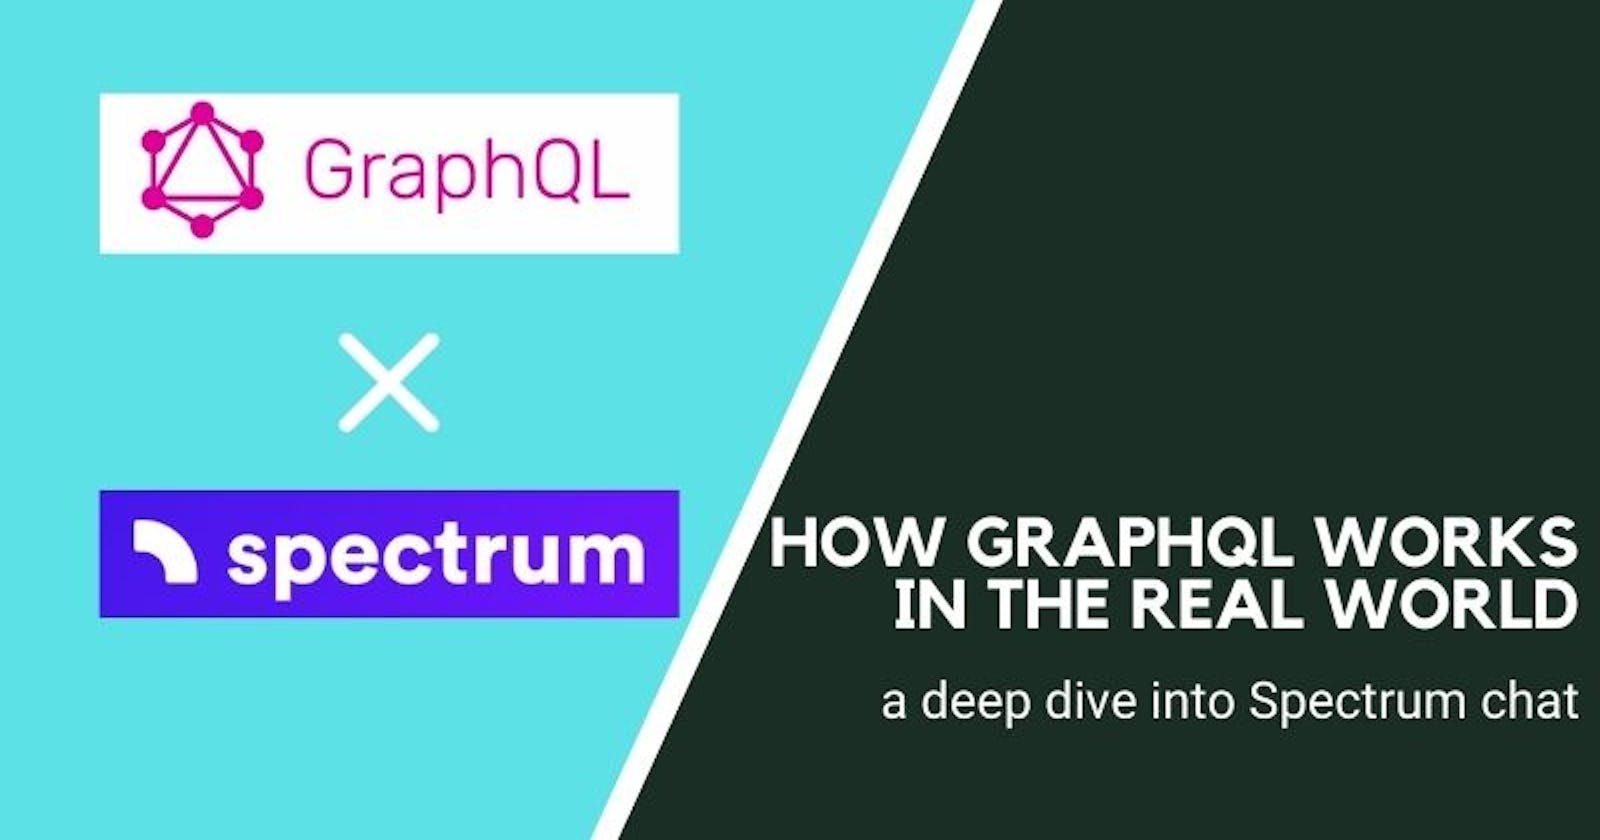 How GraphQL works in the real world, a deep dive into Spectrum chat